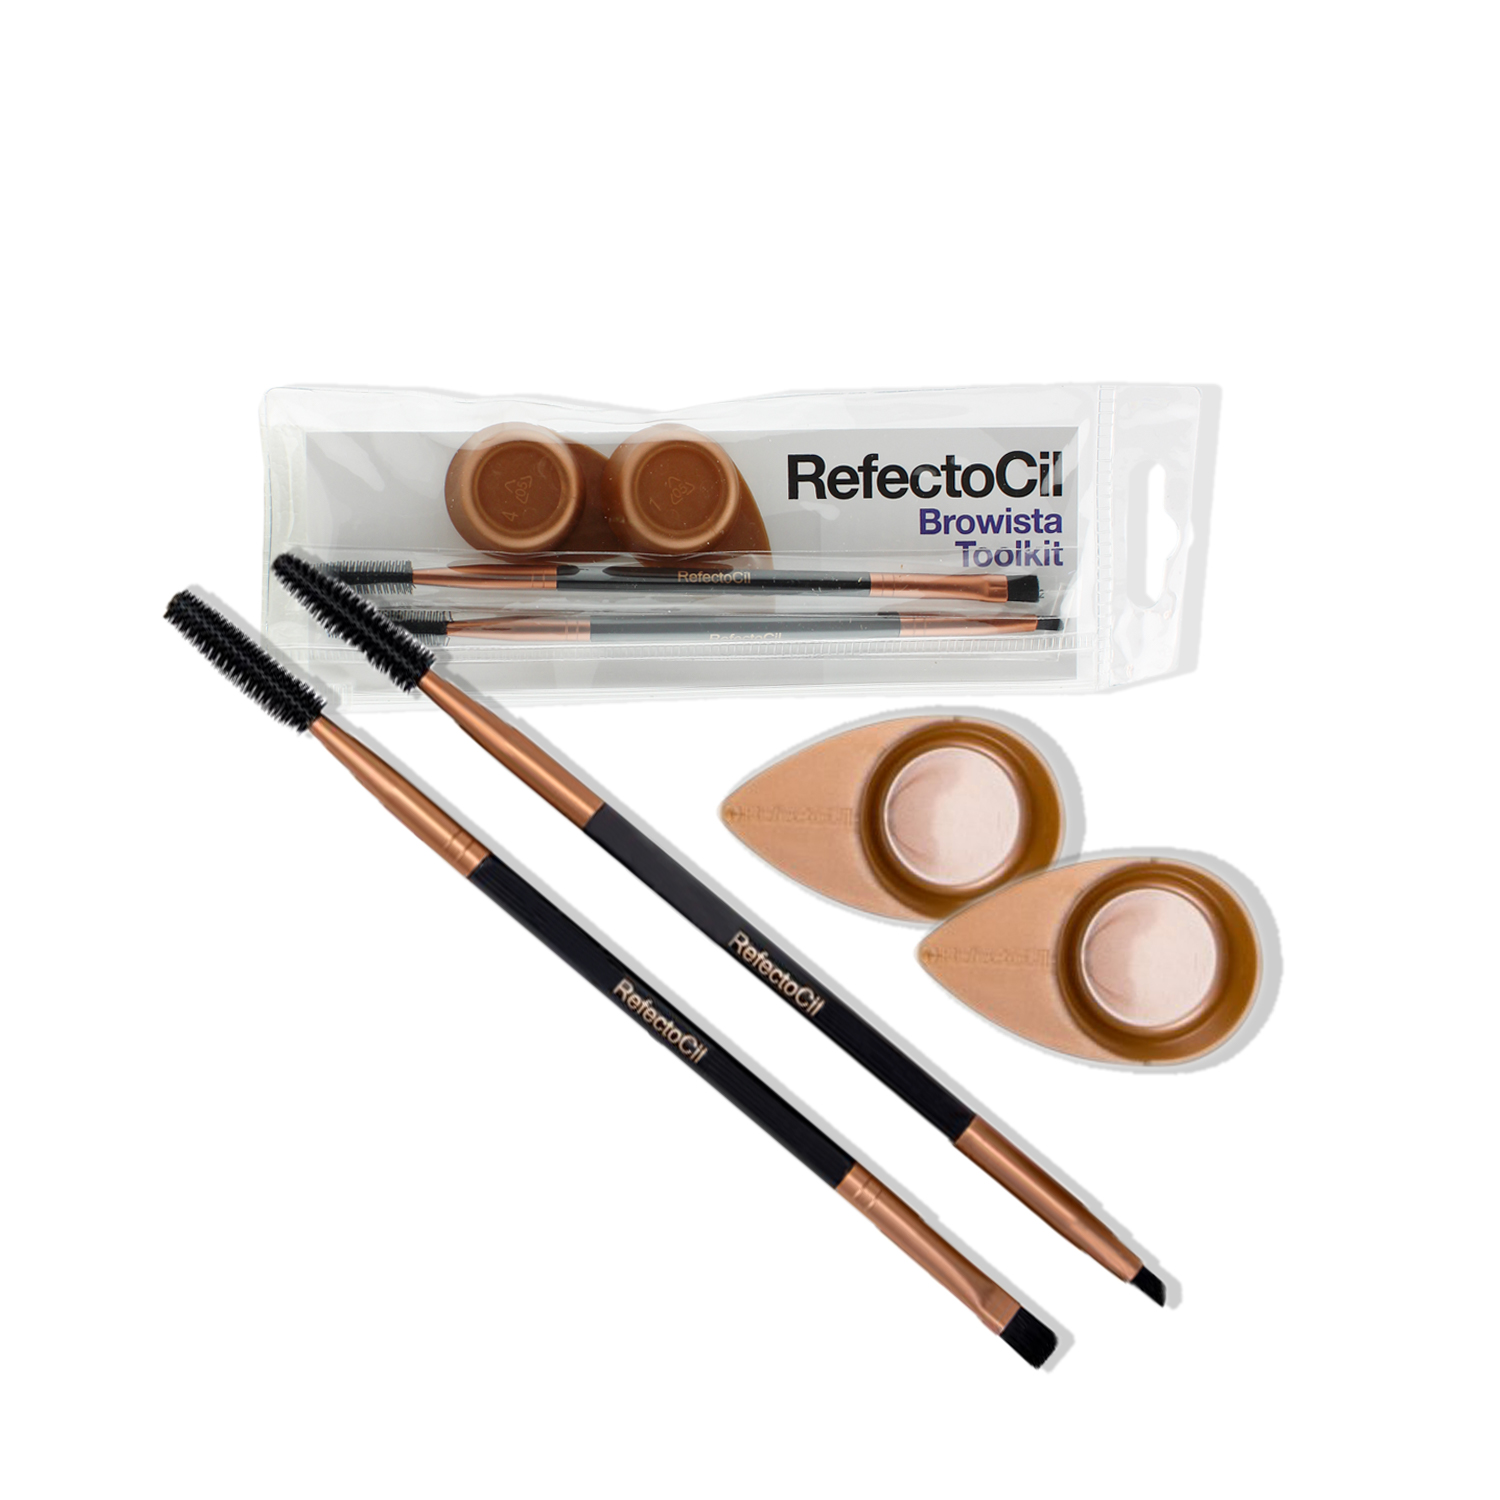 RefectoCil Browista Pinselset 4in1 